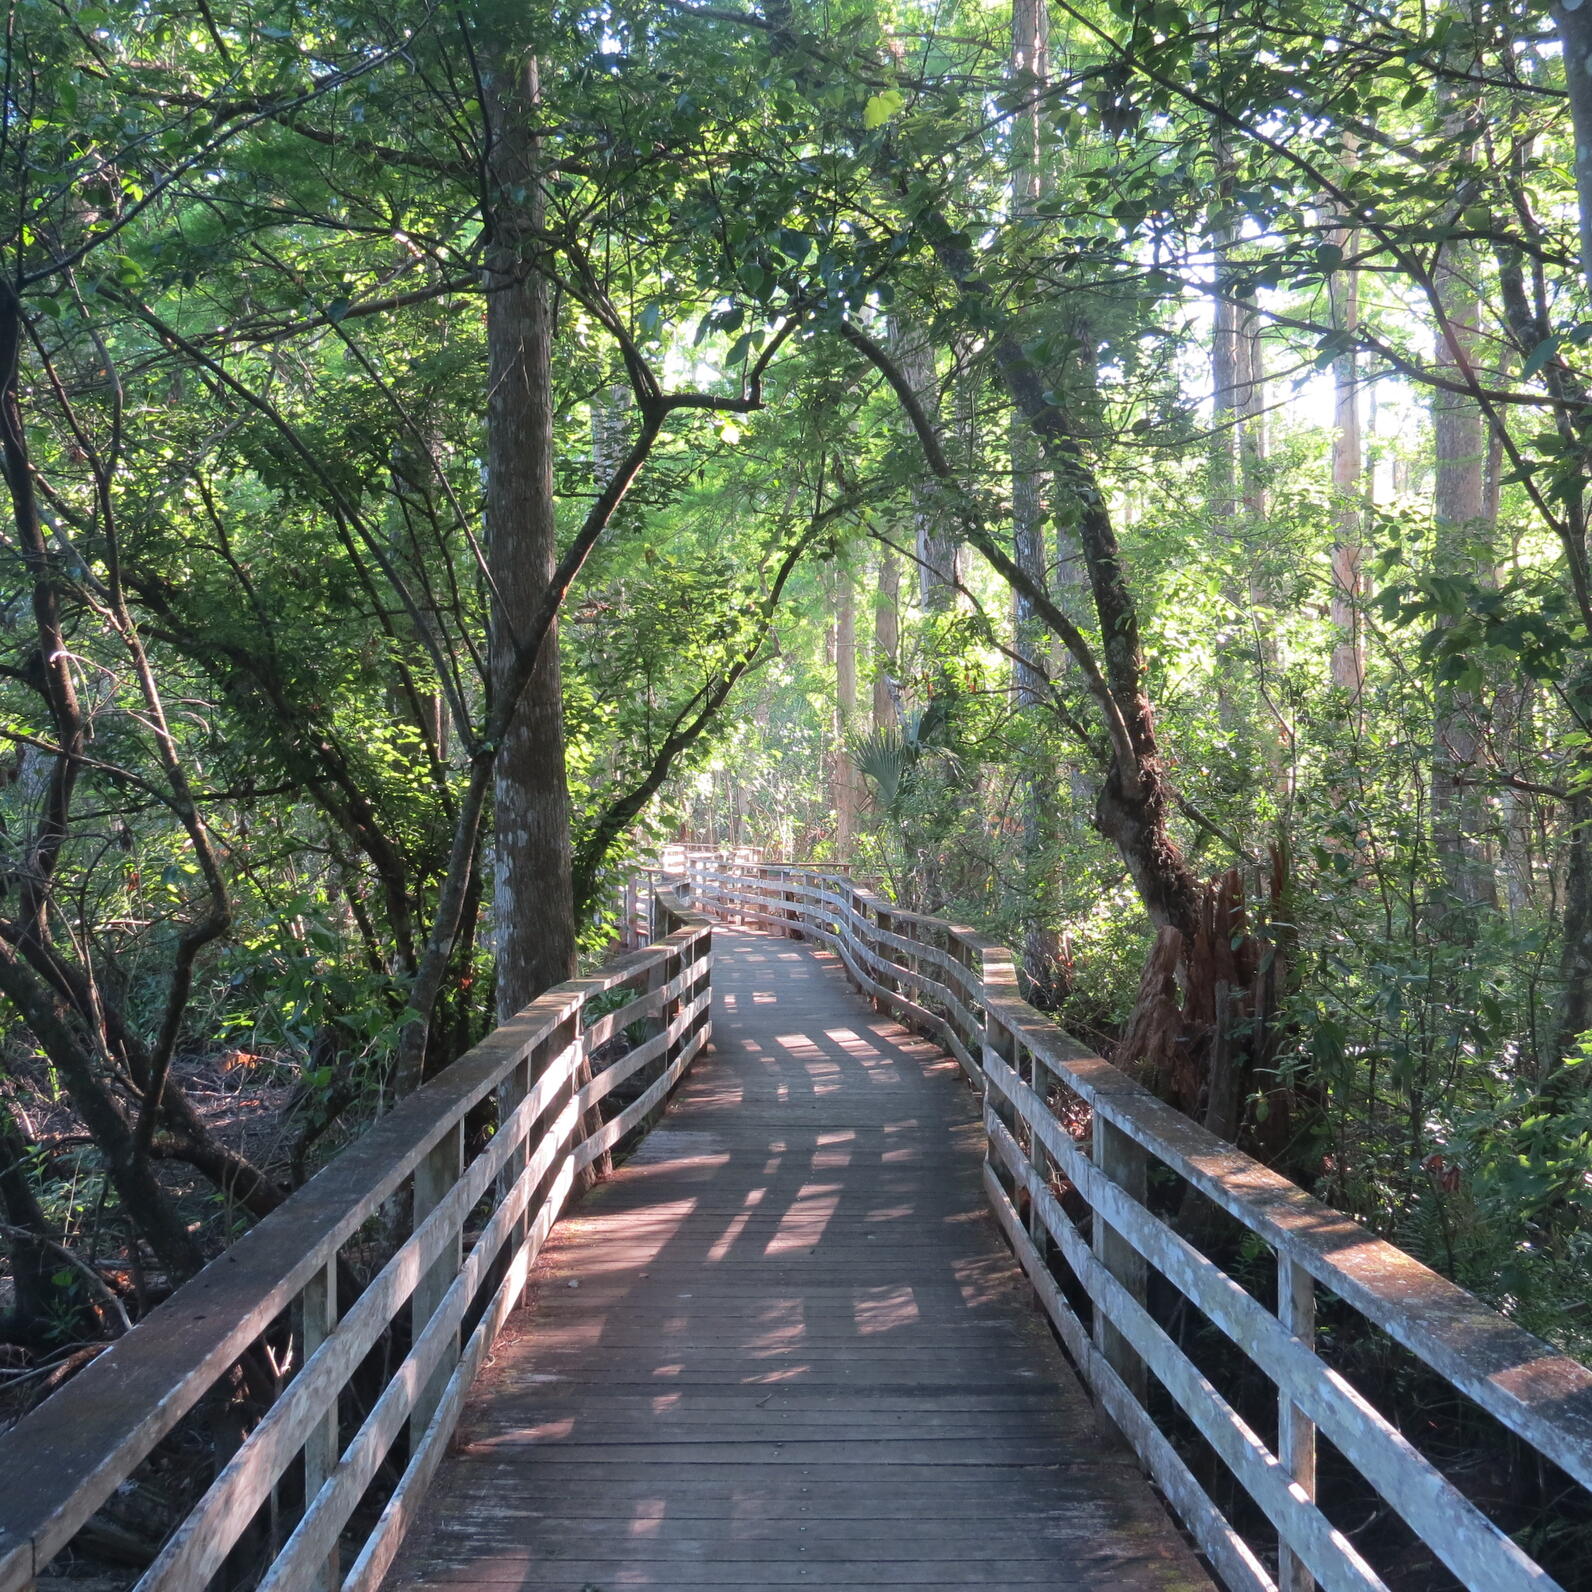 Photo of the boardwalk with dappled sunlight in the swamp.